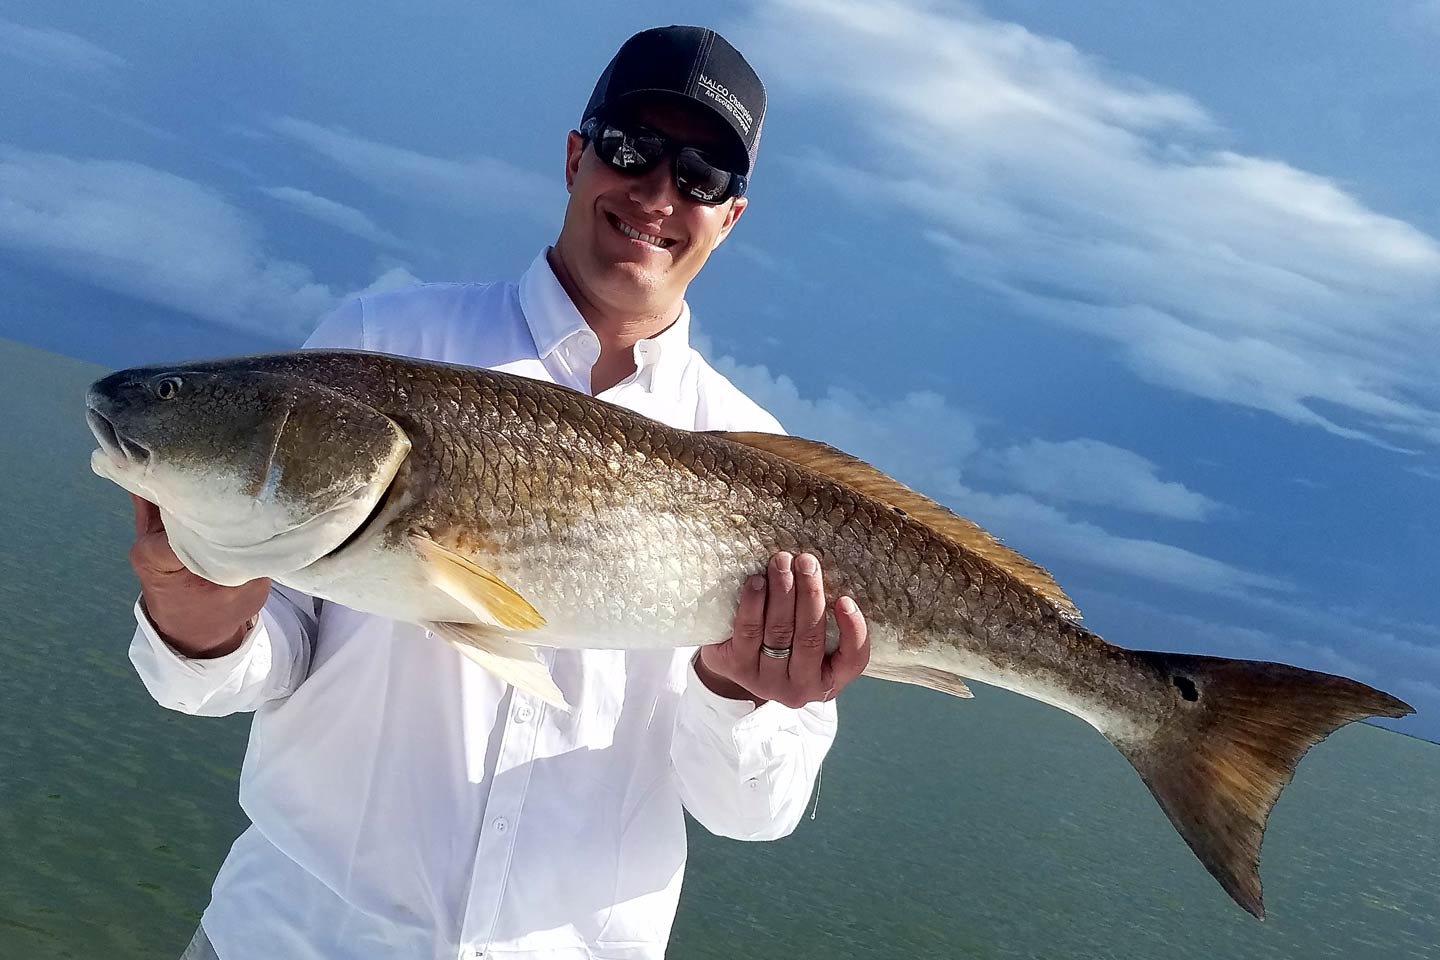 A man holding a Redfish on a boat in Florida